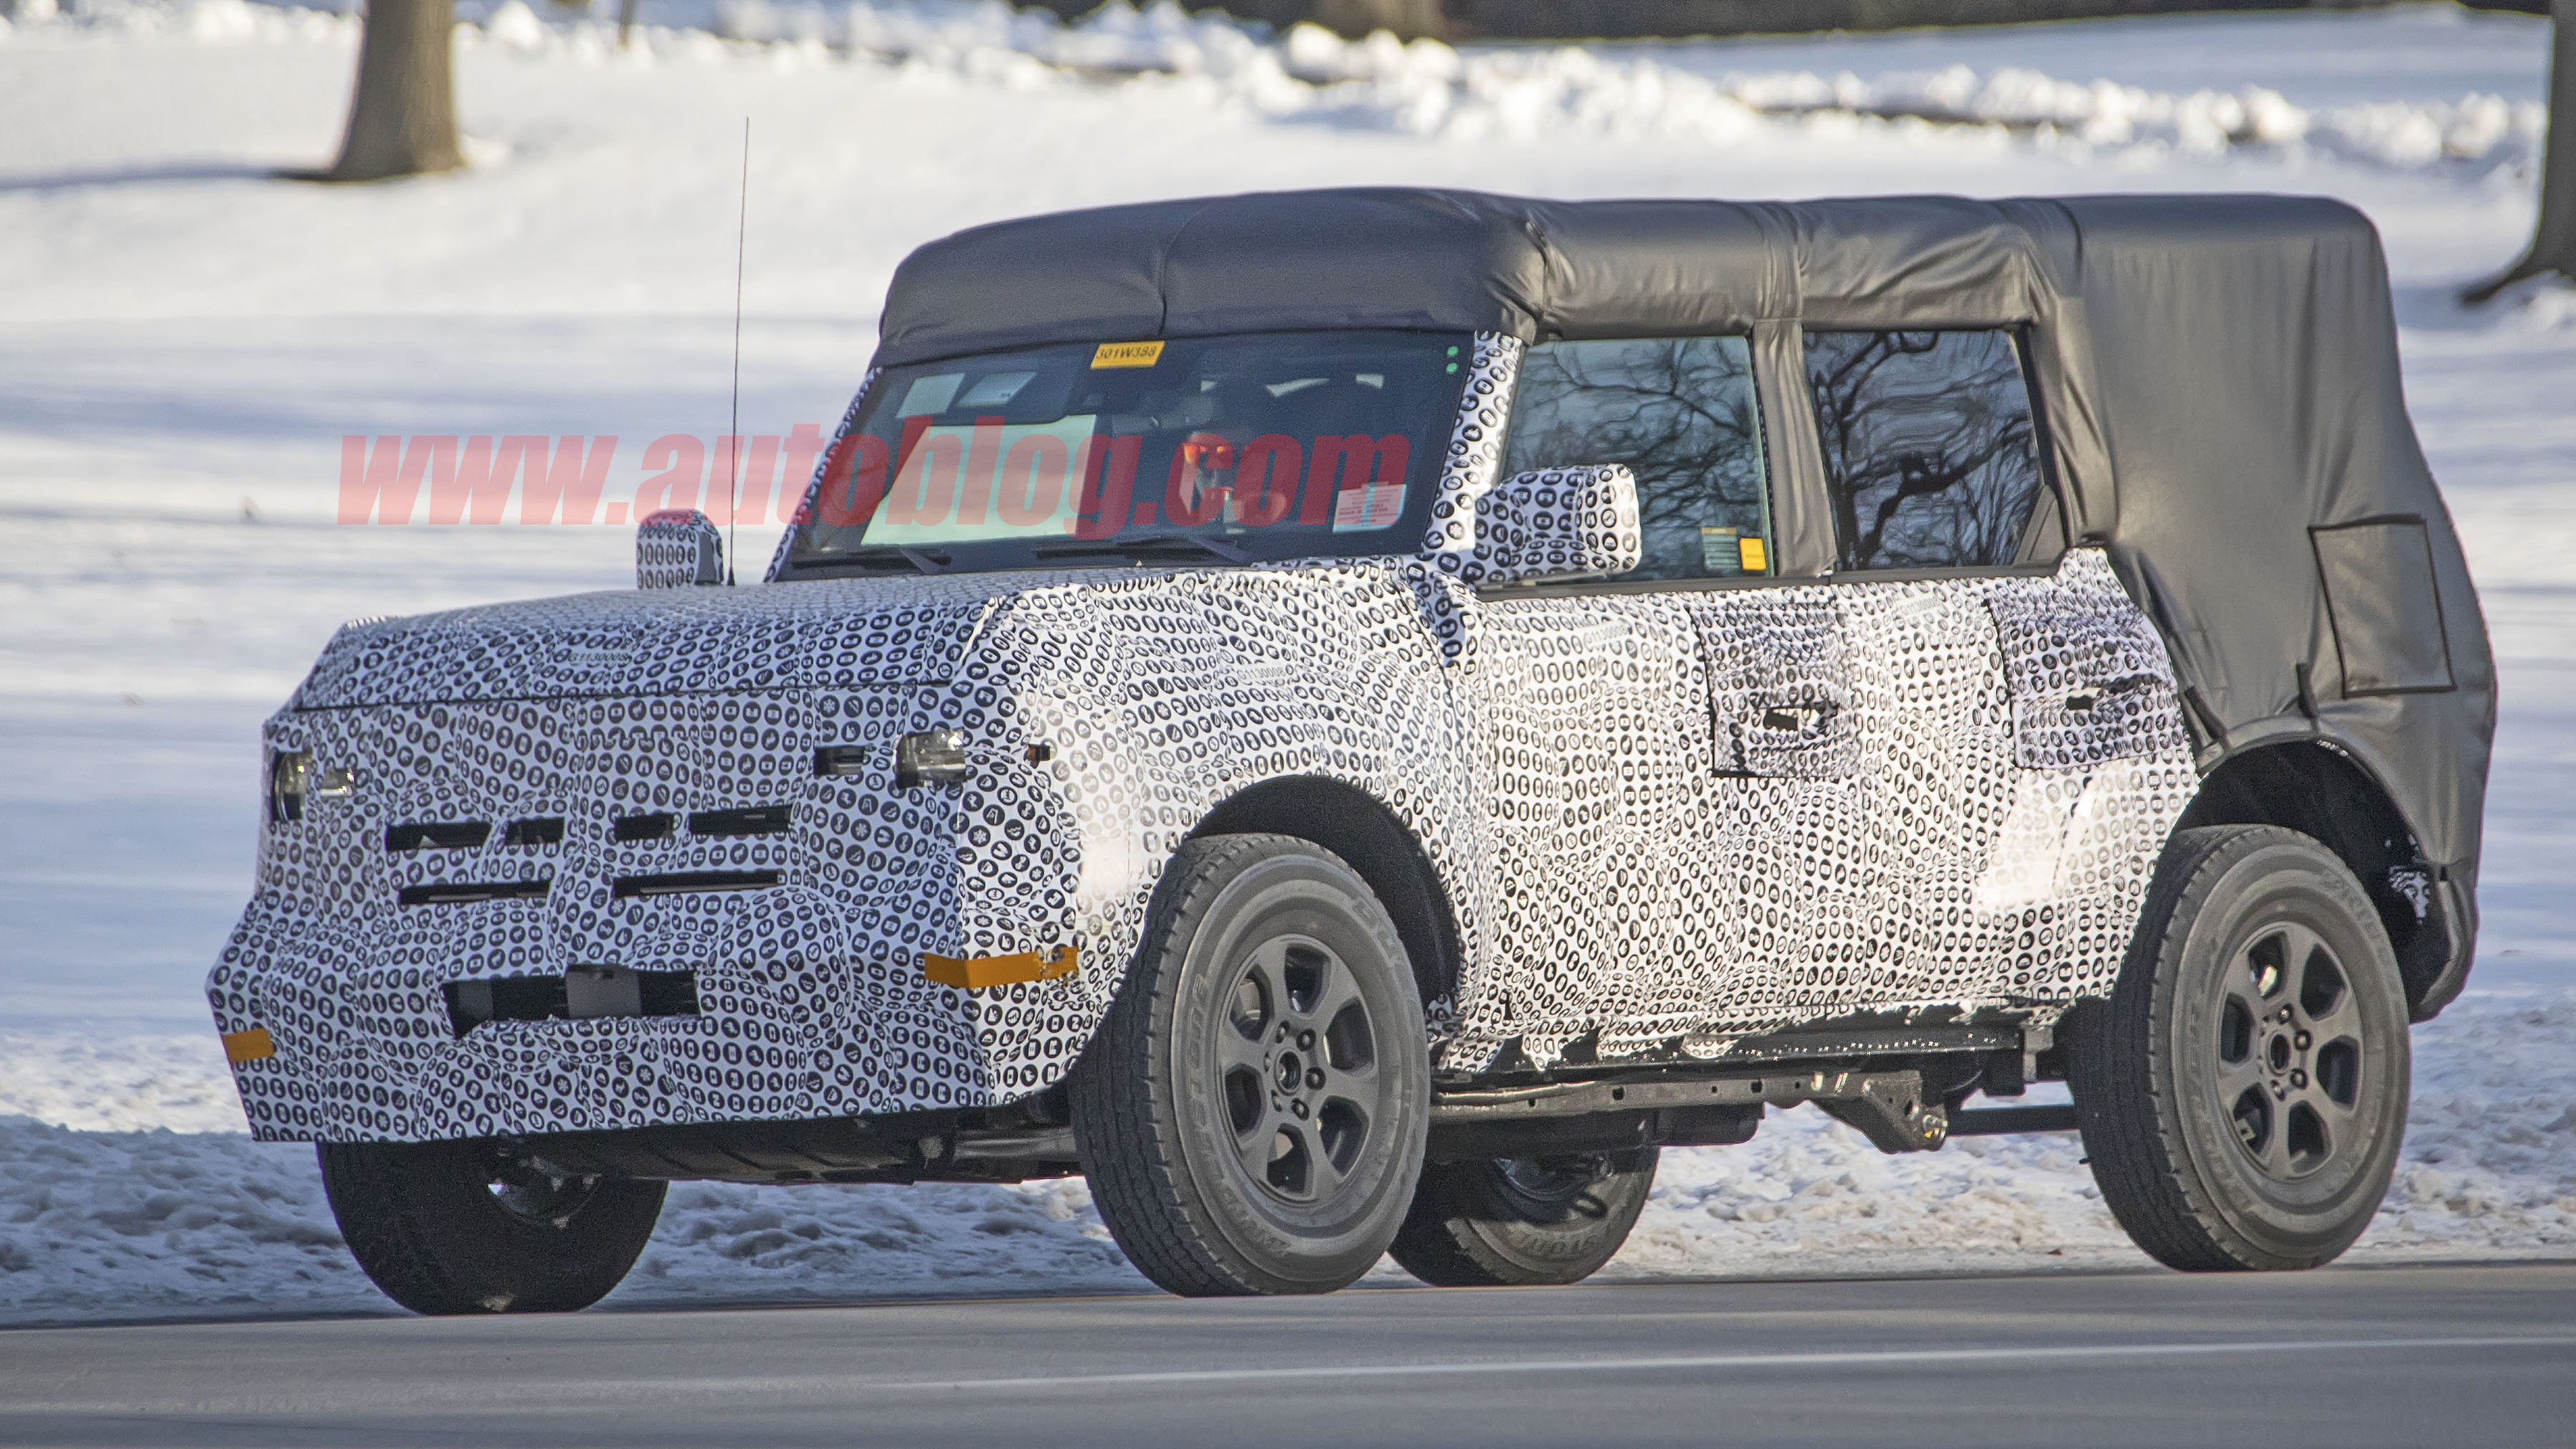 new-shots-of-the-2021-ford-bronco-show-suspension-removable-roof